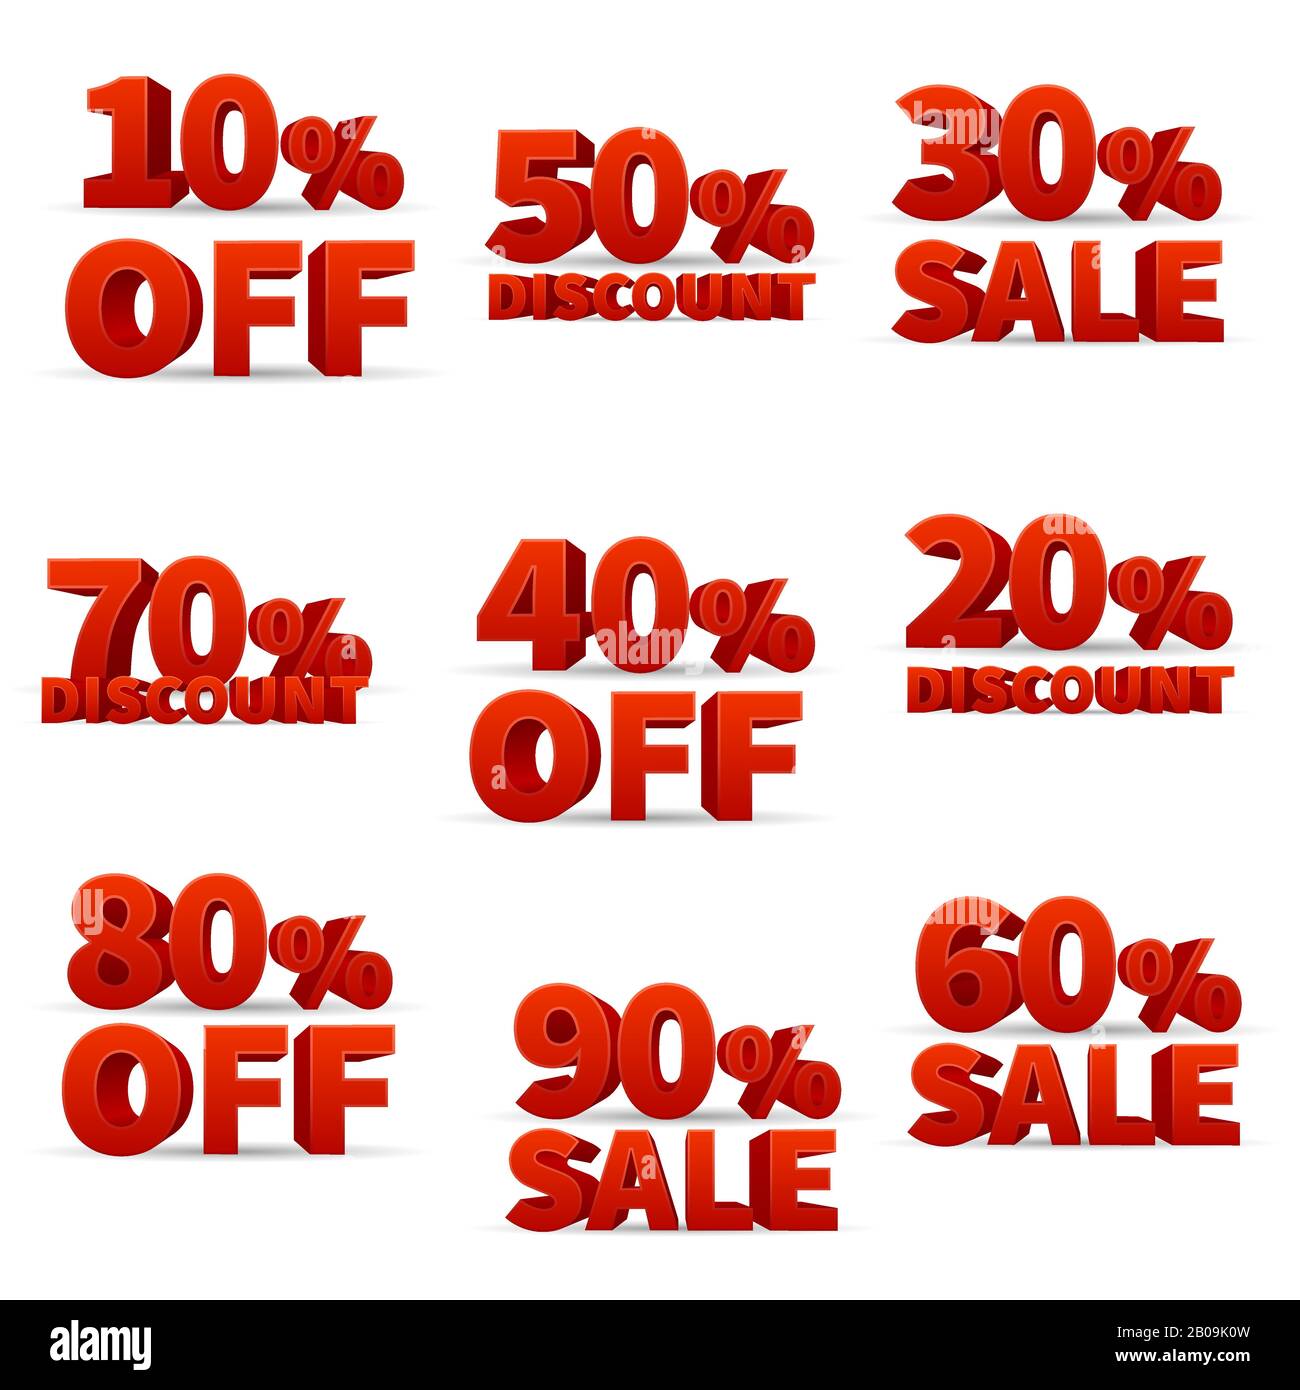 Promotional discount store signs with price percent off vector stock. Set of discount for retail, illustration of red big discounts Stock Vector